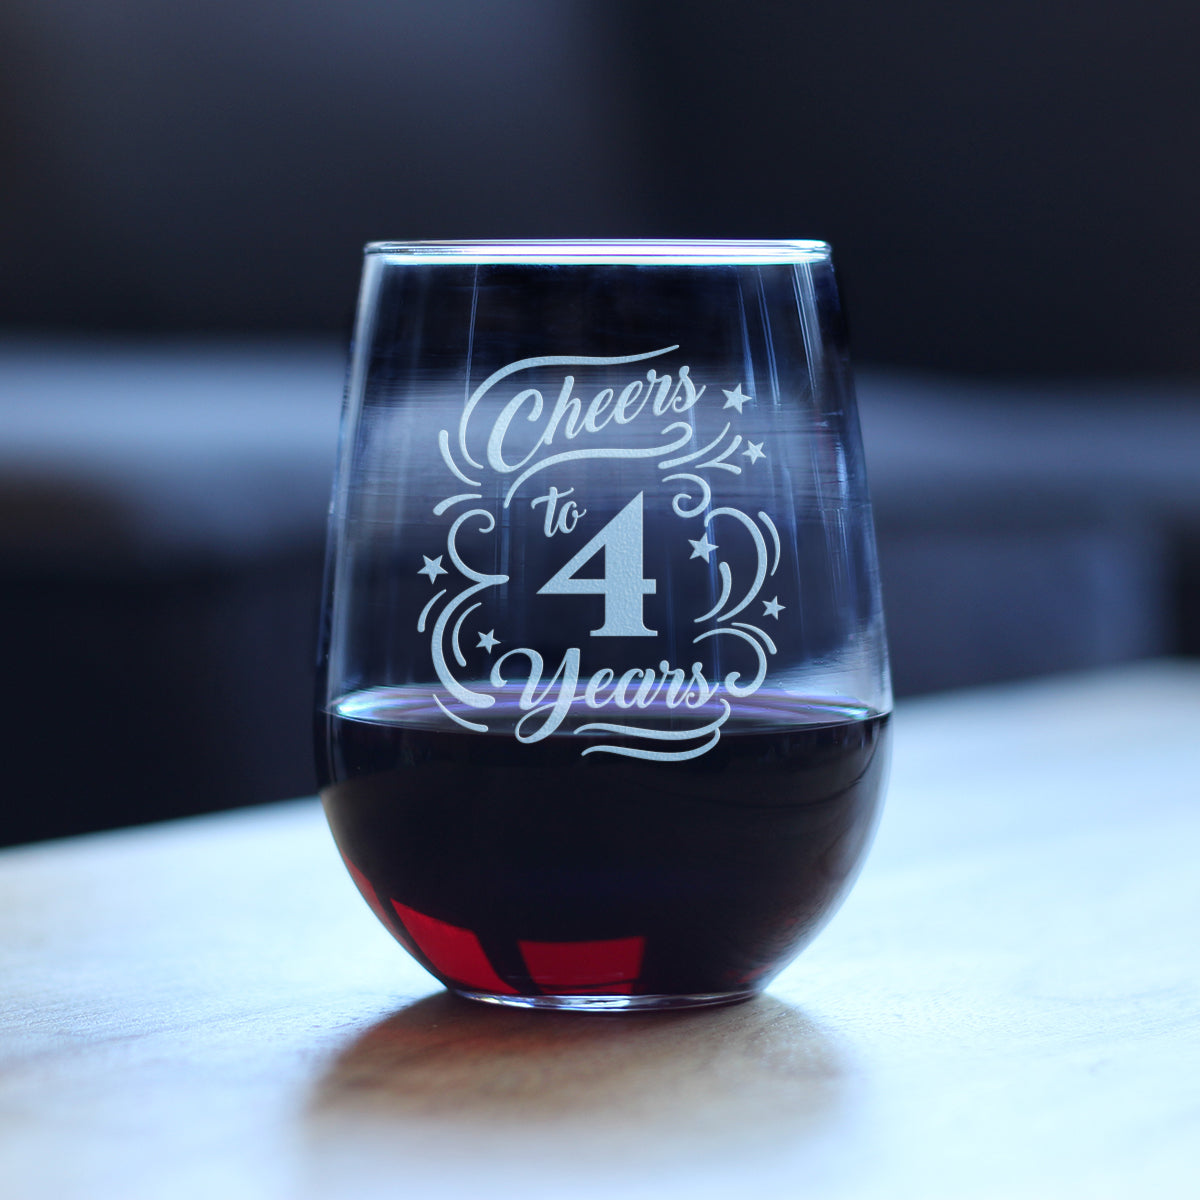 Cheers to 4 Years - Stemless Wine Glass Gifts for Women &amp; Men - 4th Anniversary Party Decor - Large 17 Oz Glasses